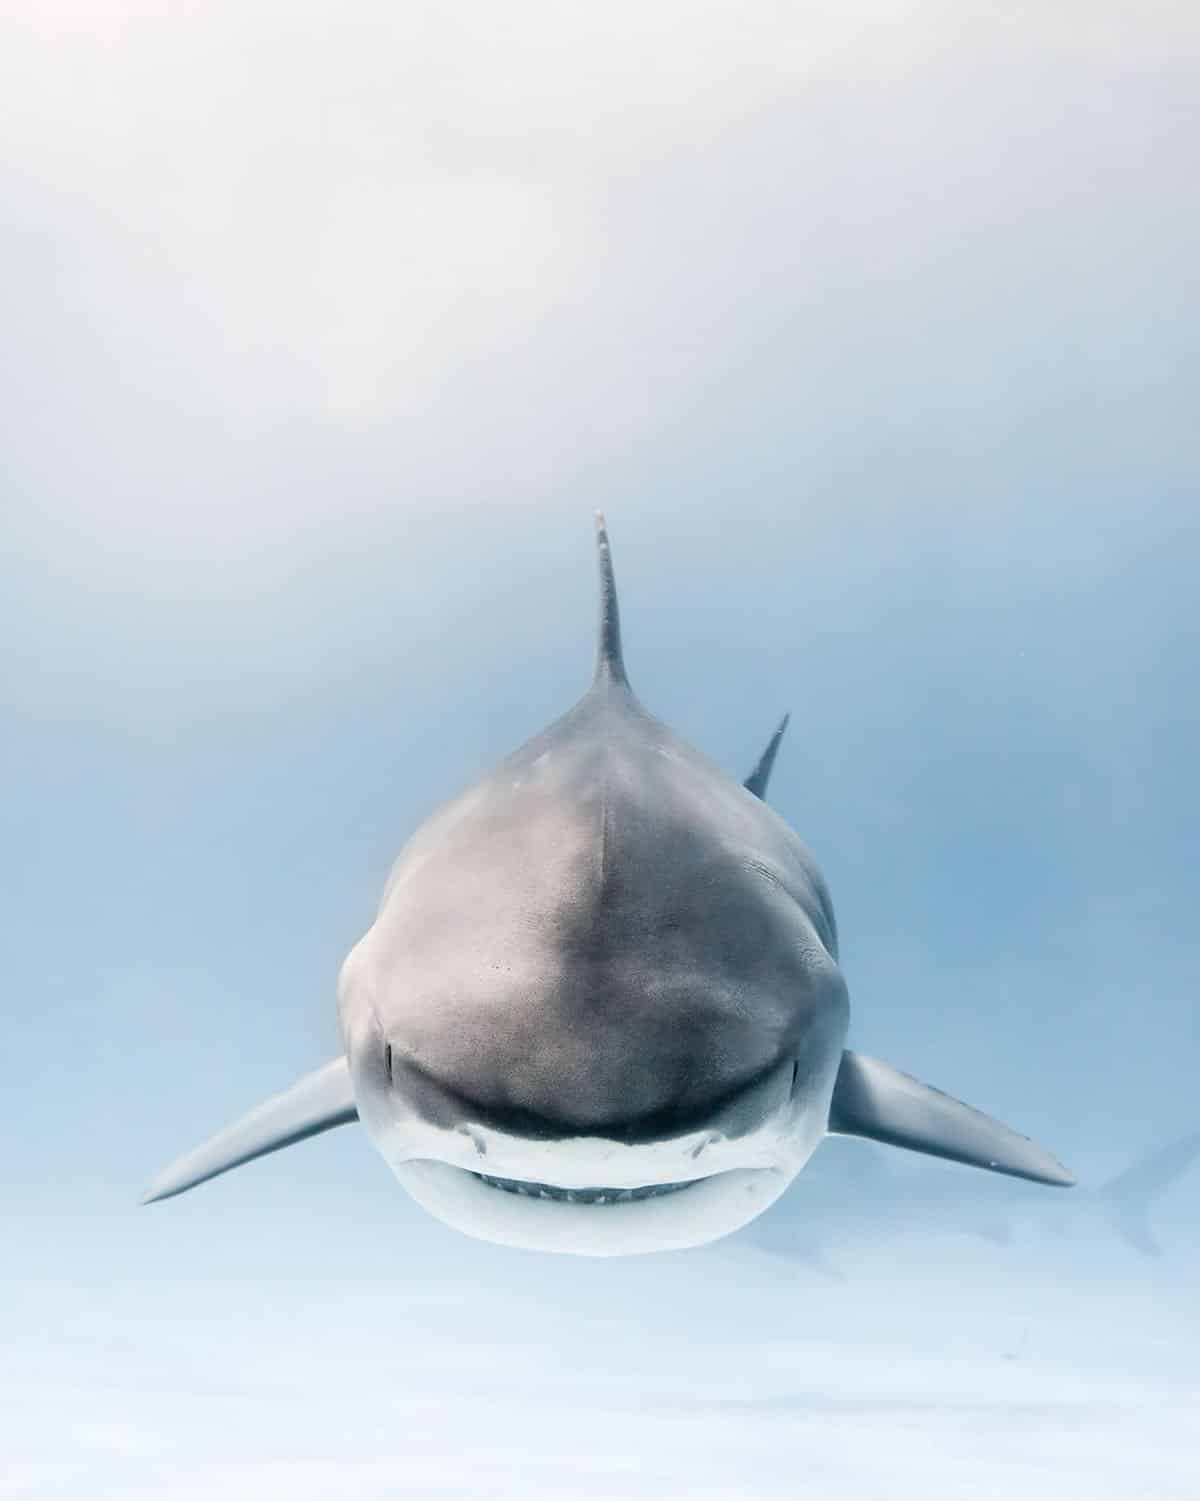 Shark Photography by Mike Coots